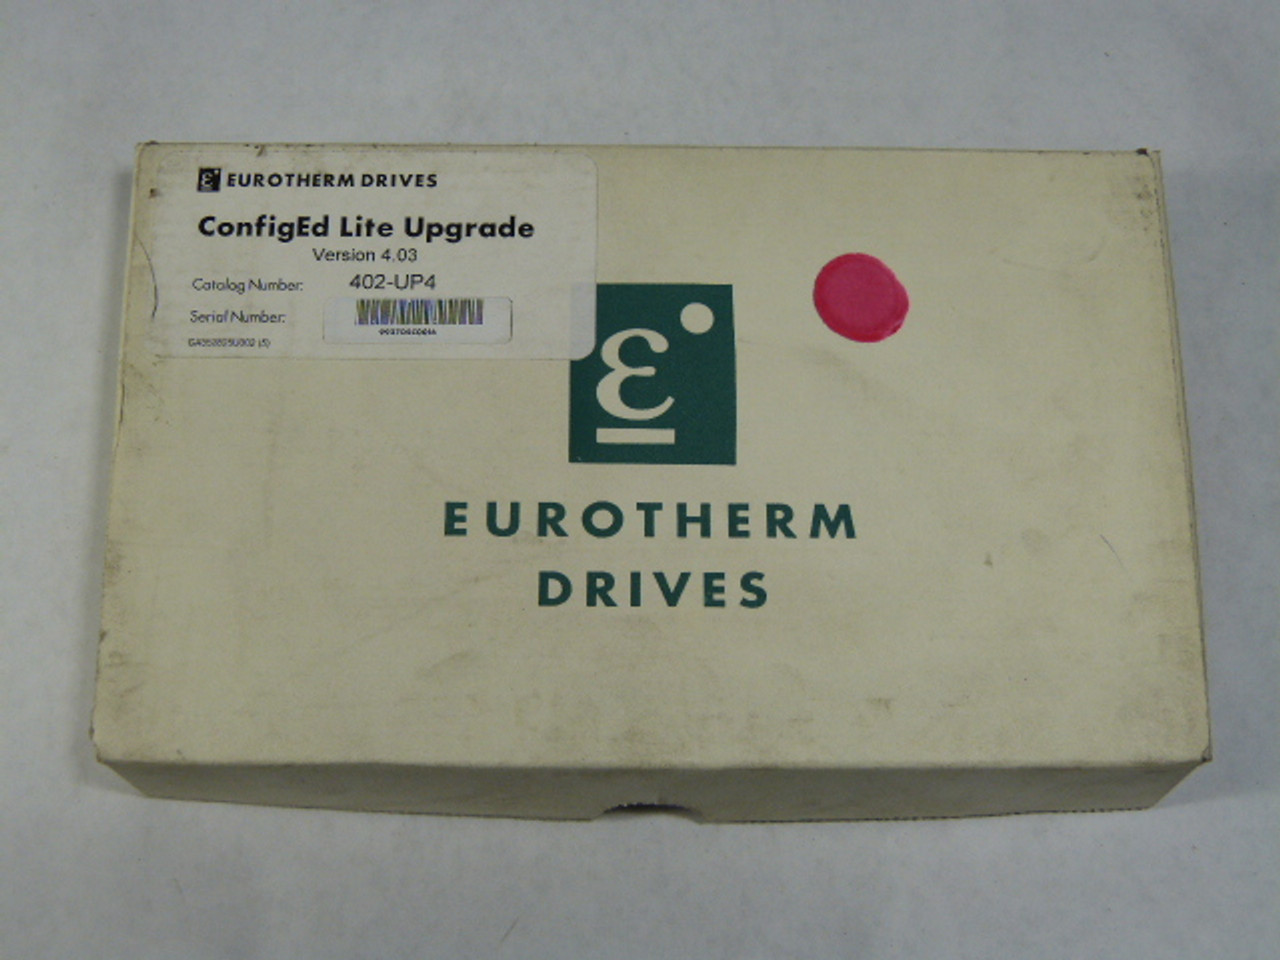 Eurotherm 402-UP4 ConfigEd Lite Upgrade Version 4.03 NEW